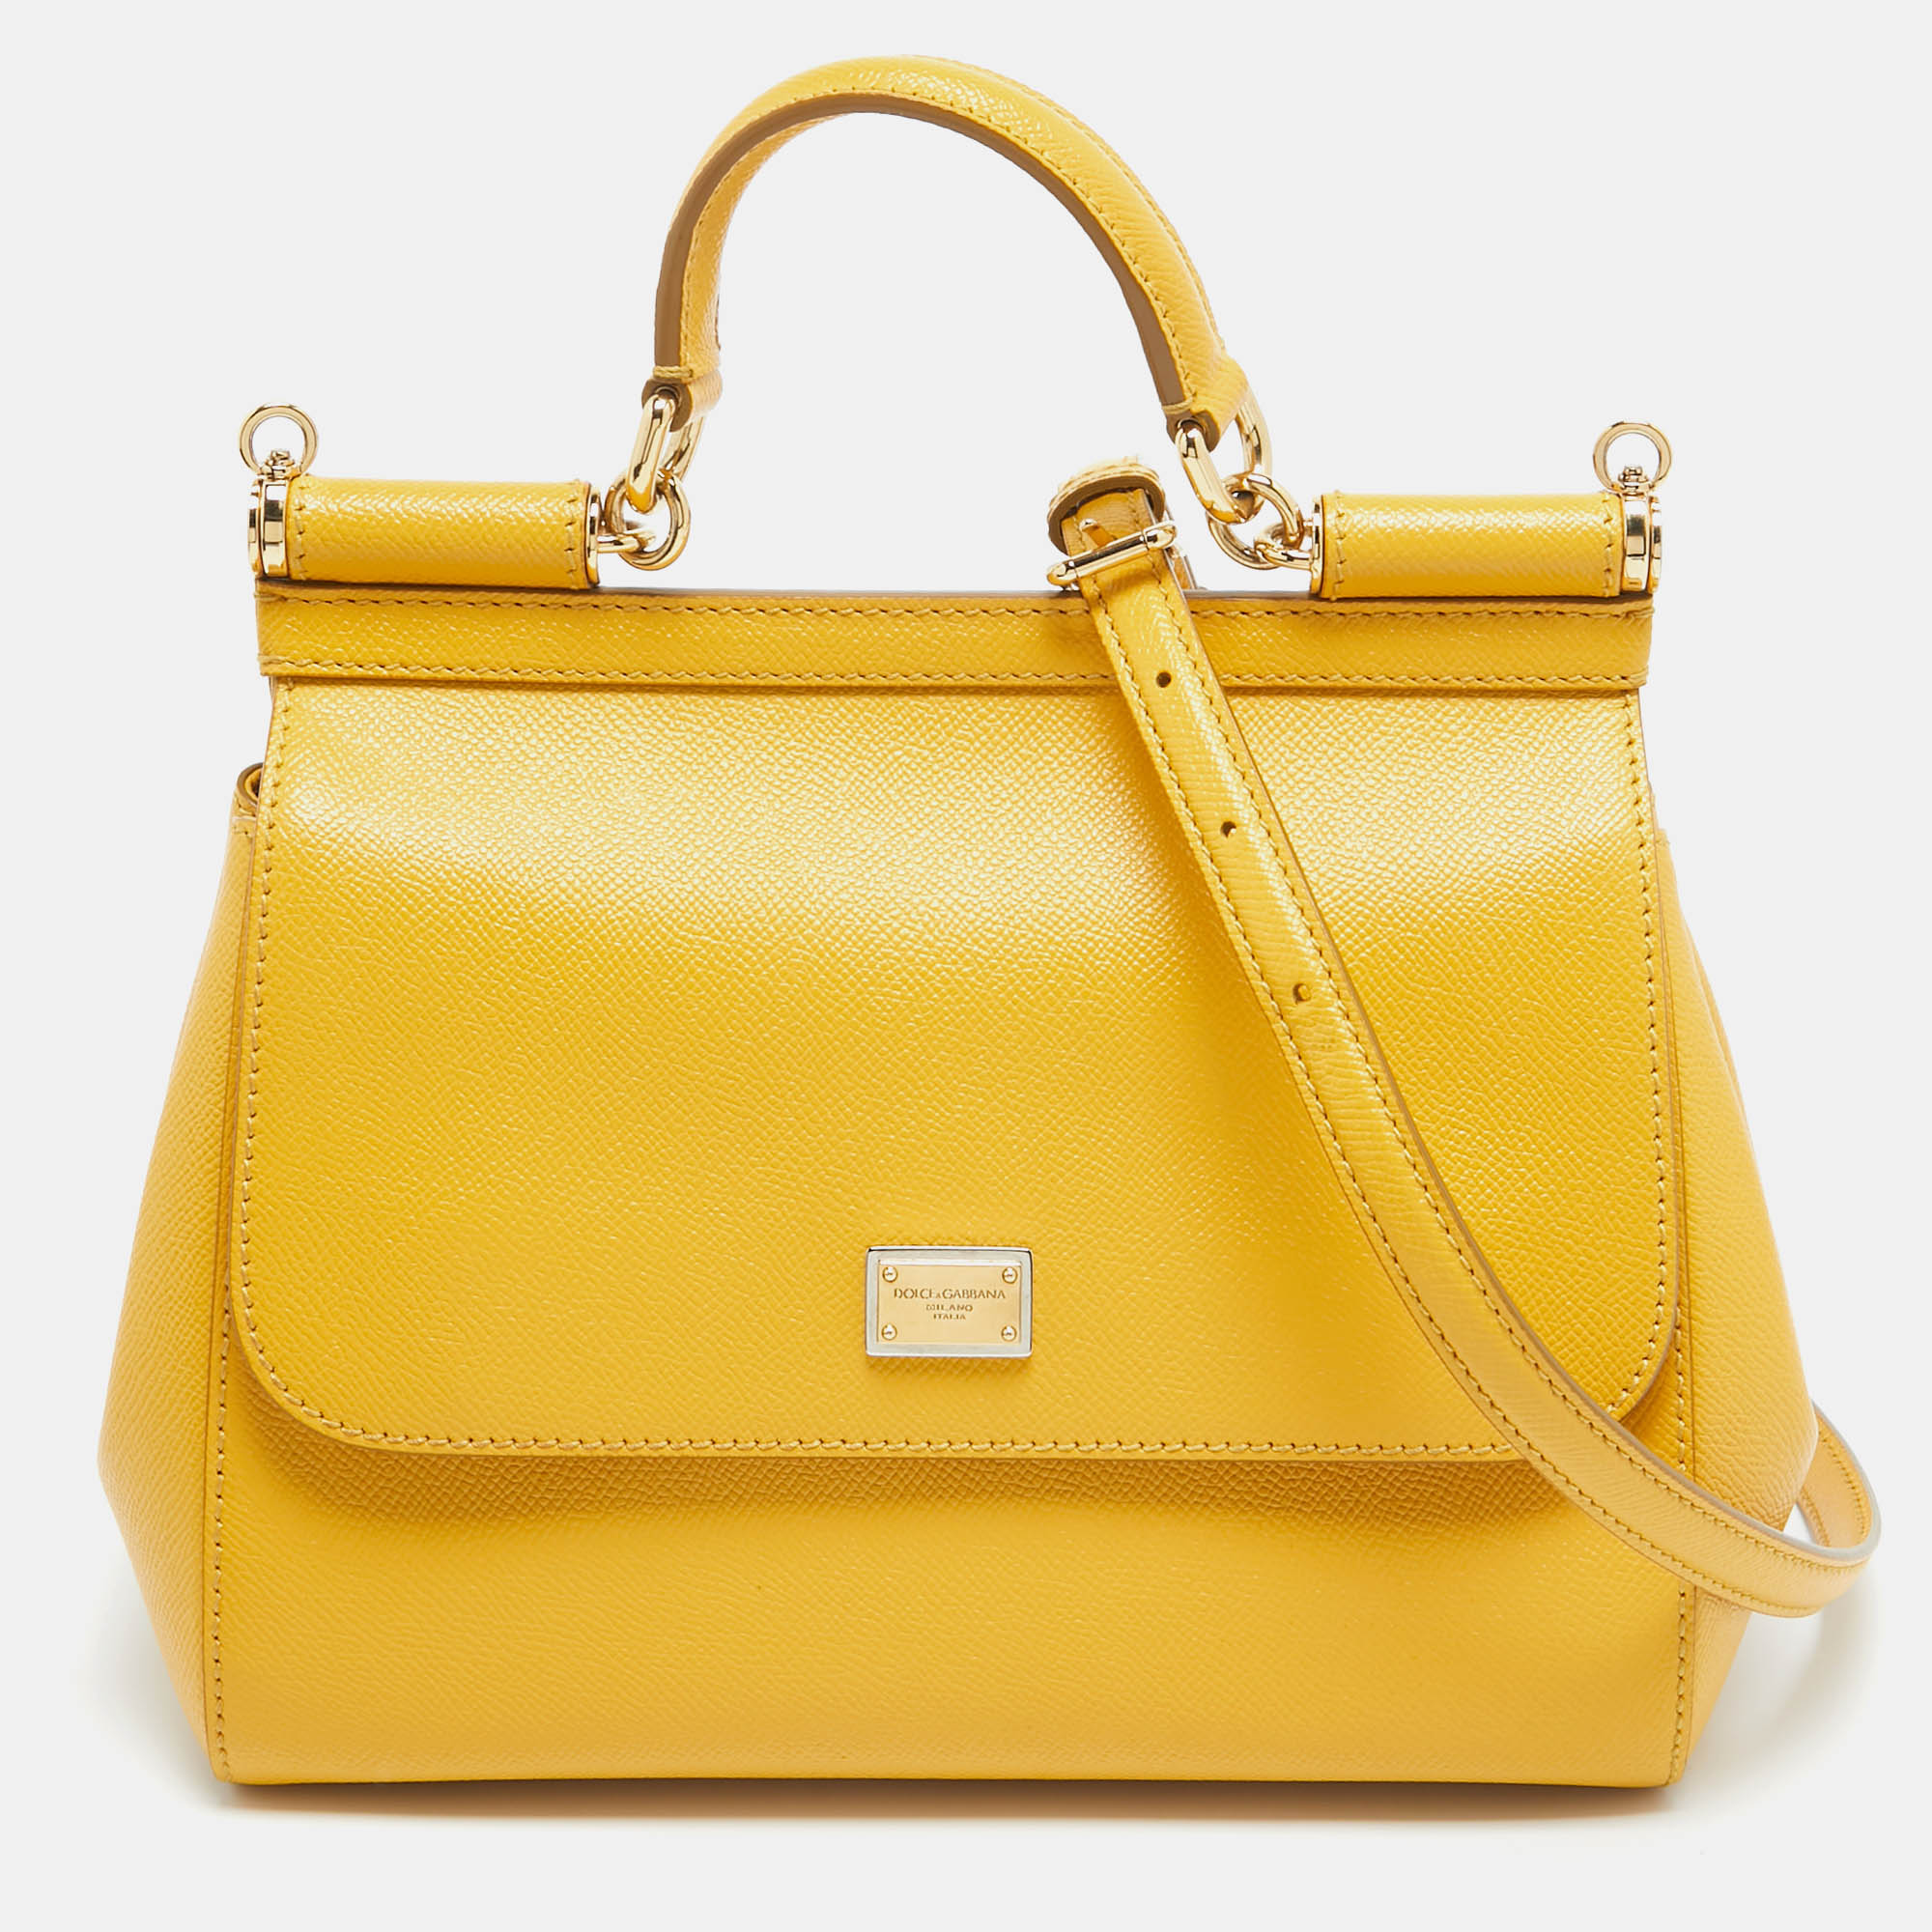 Pre-owned Dolce & Gabbana Yellow Leather Medium Miss Sicily Top Handle Bag